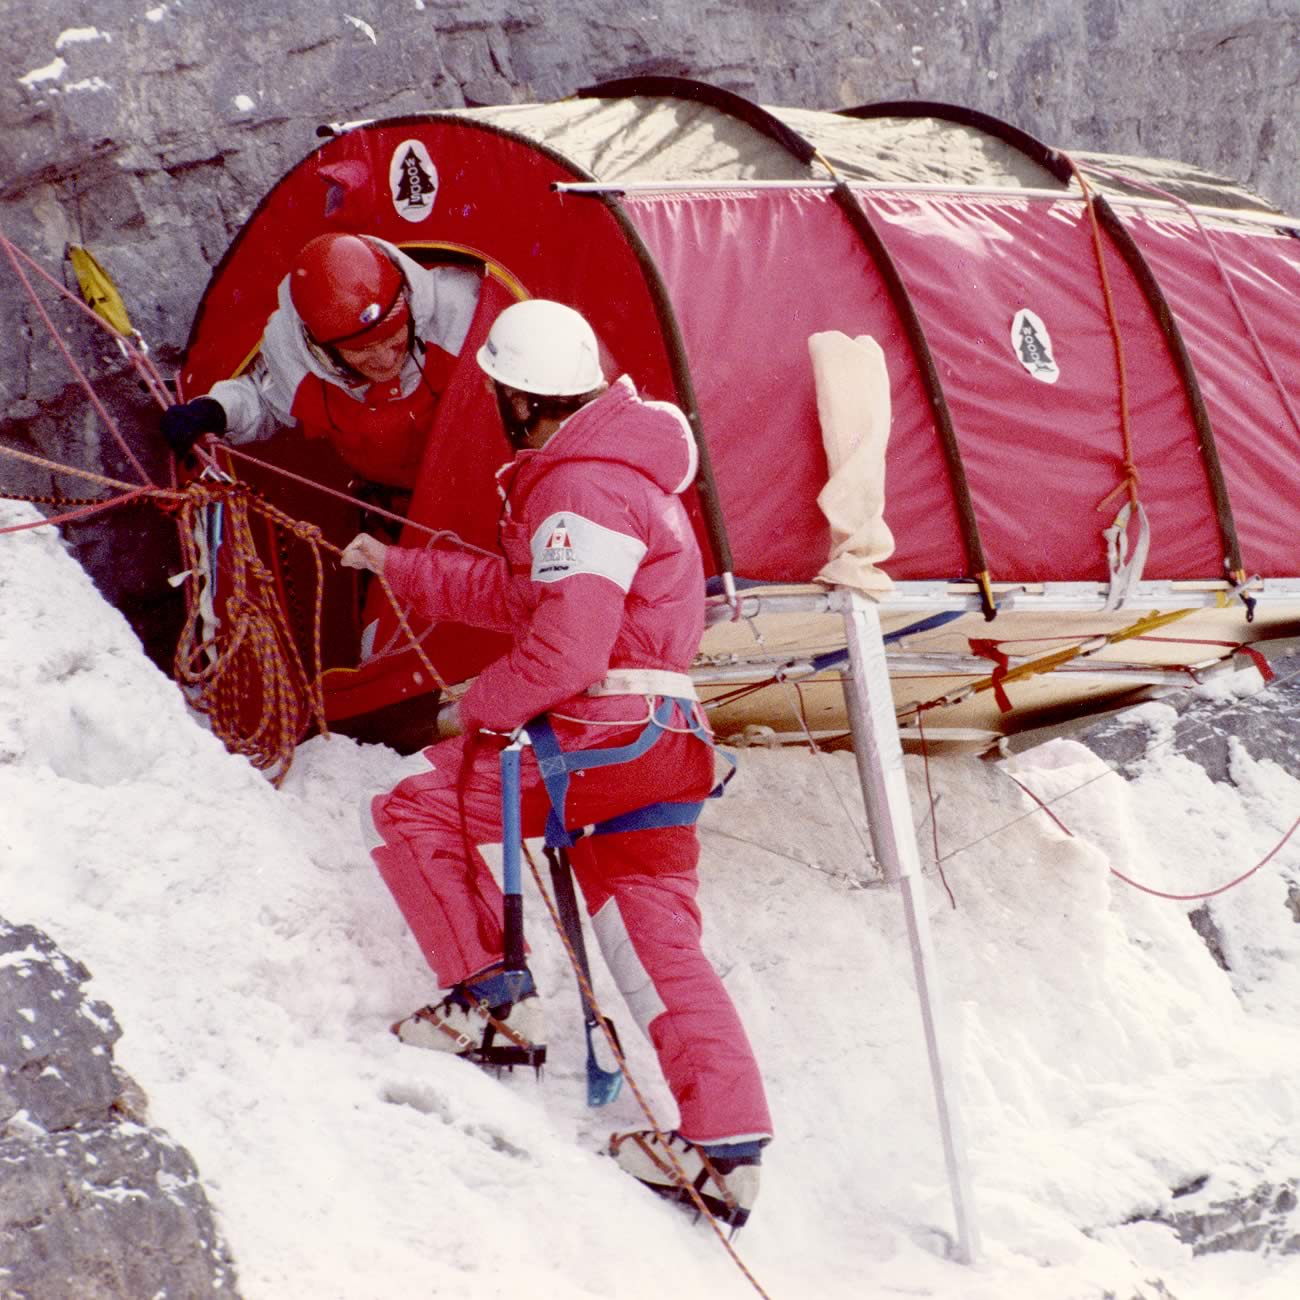 A tubular red Woods tent with ropes and metal legs hangs from the vertical rock face of a mountainside. A climber emerges from the door while another is outside, tethered with a harness and ropes.